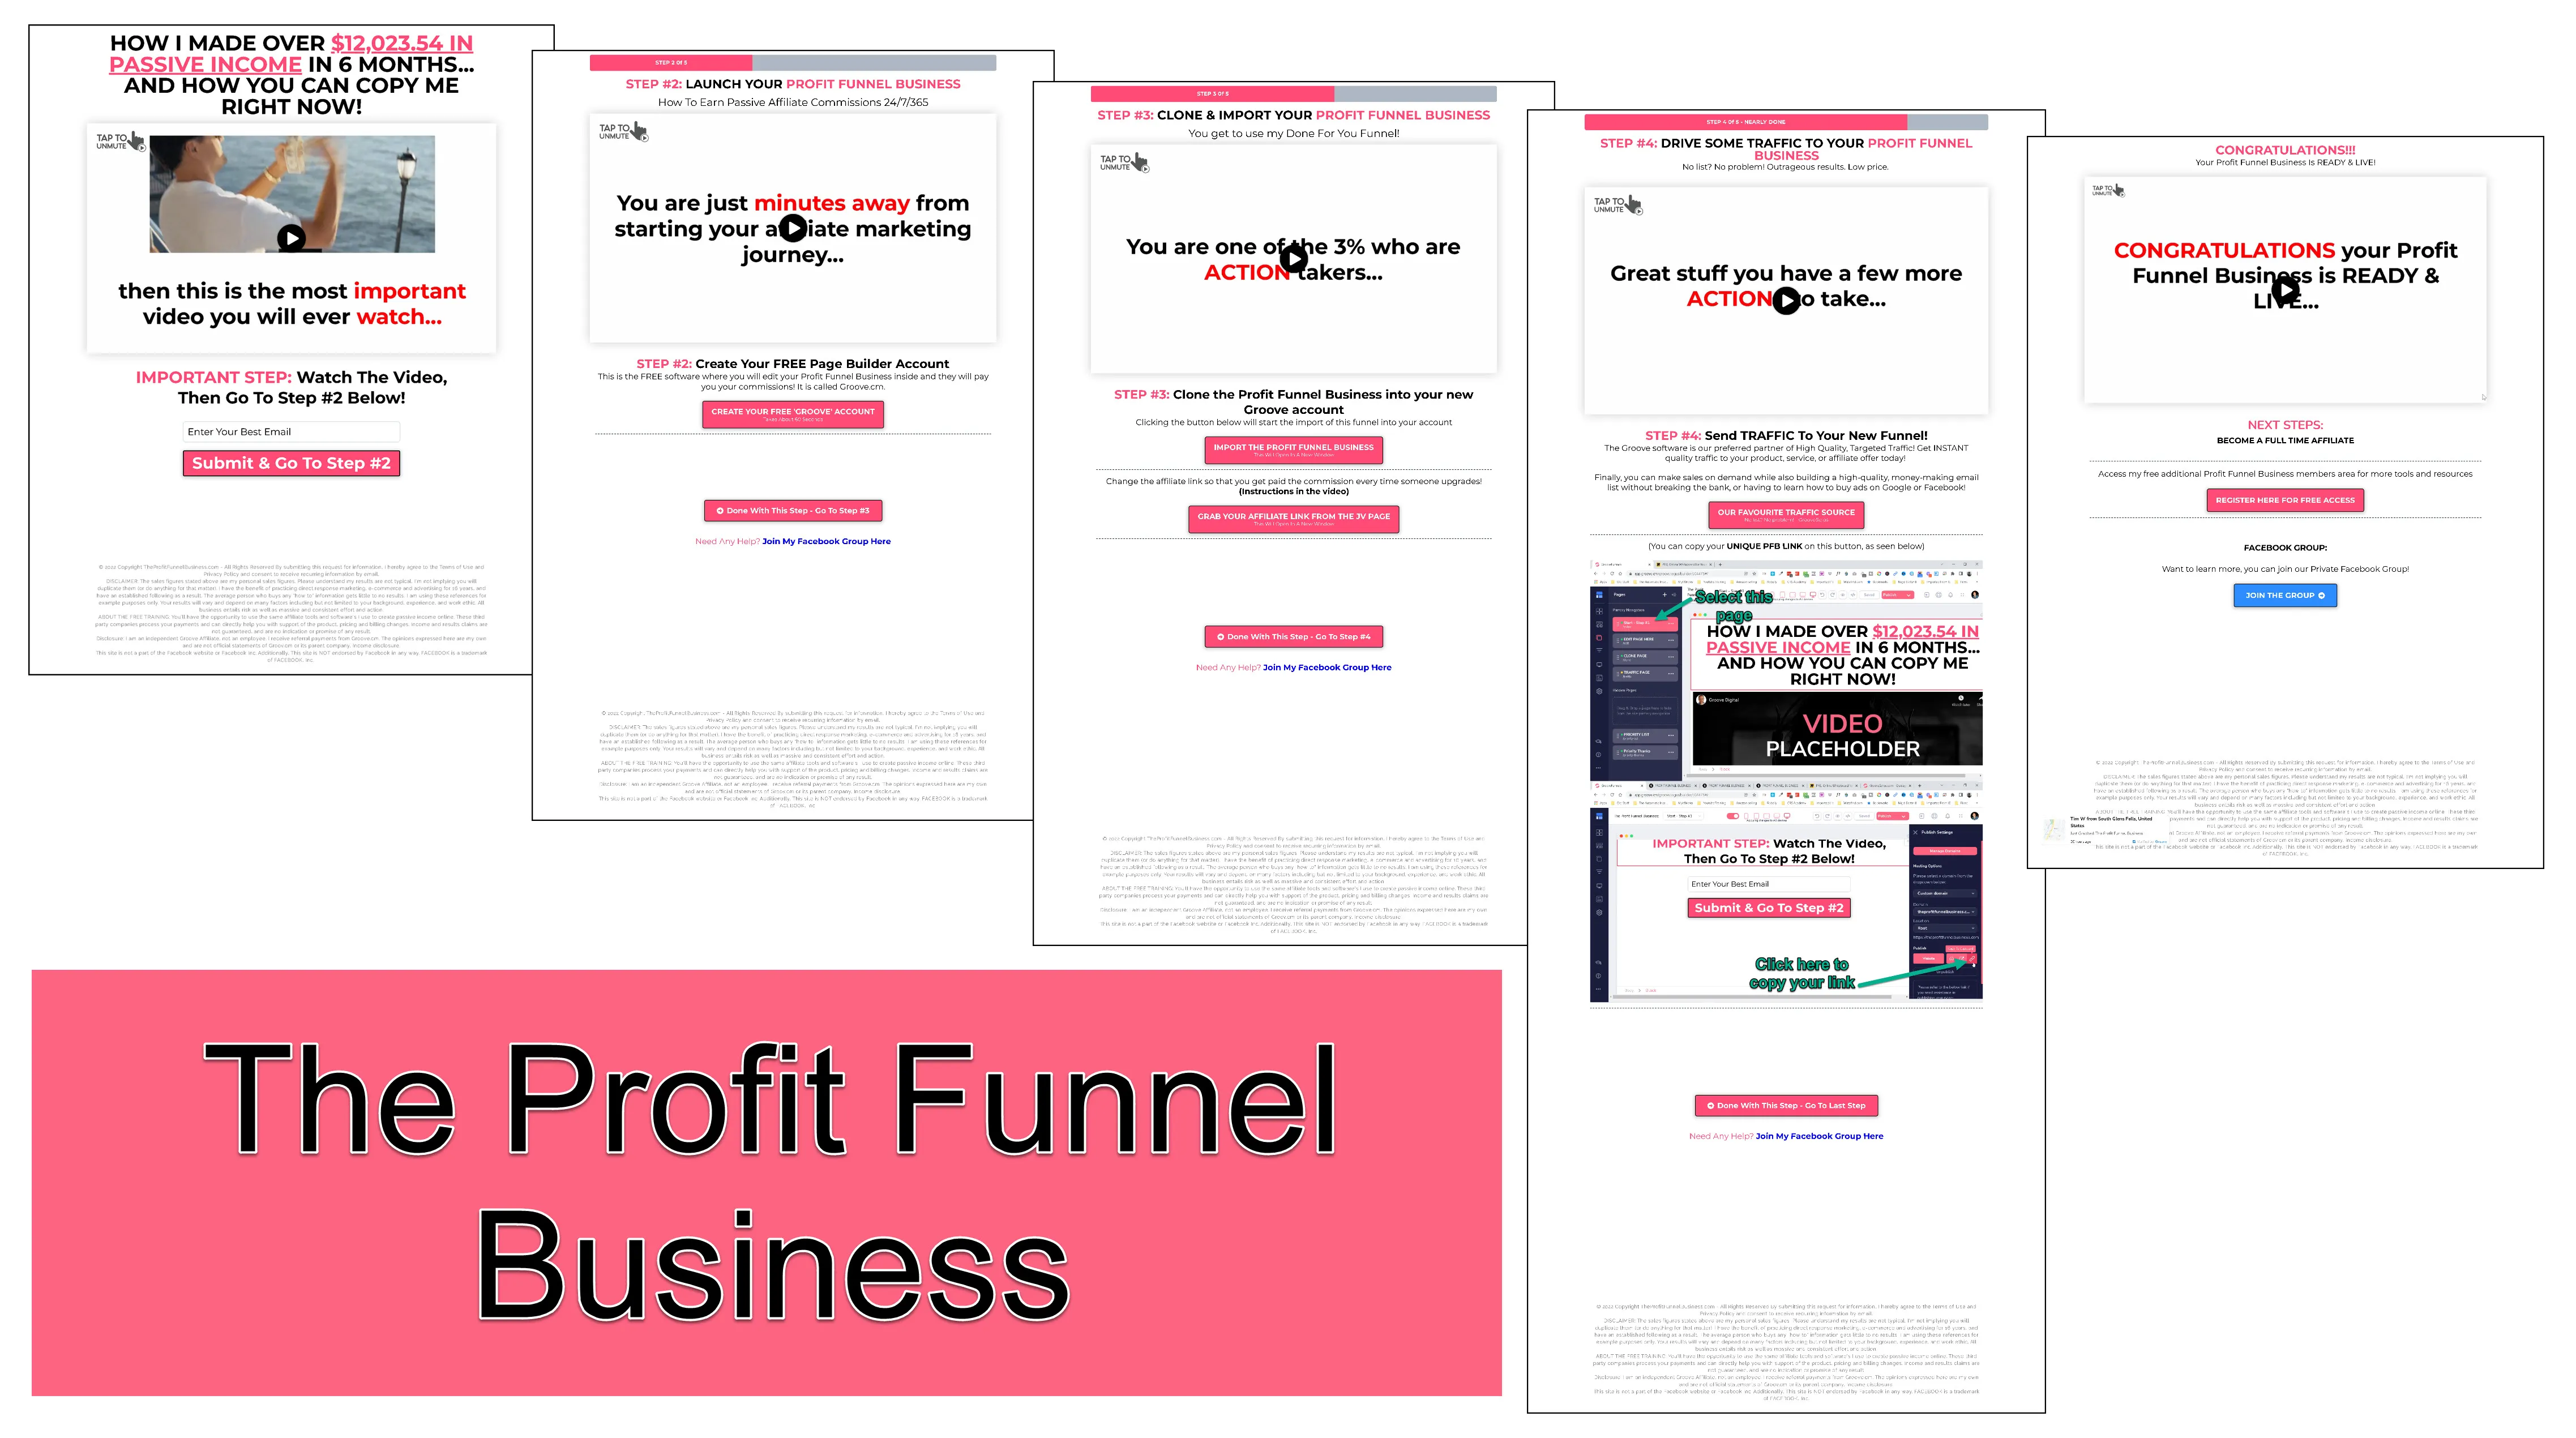 The Profit Funnel Business